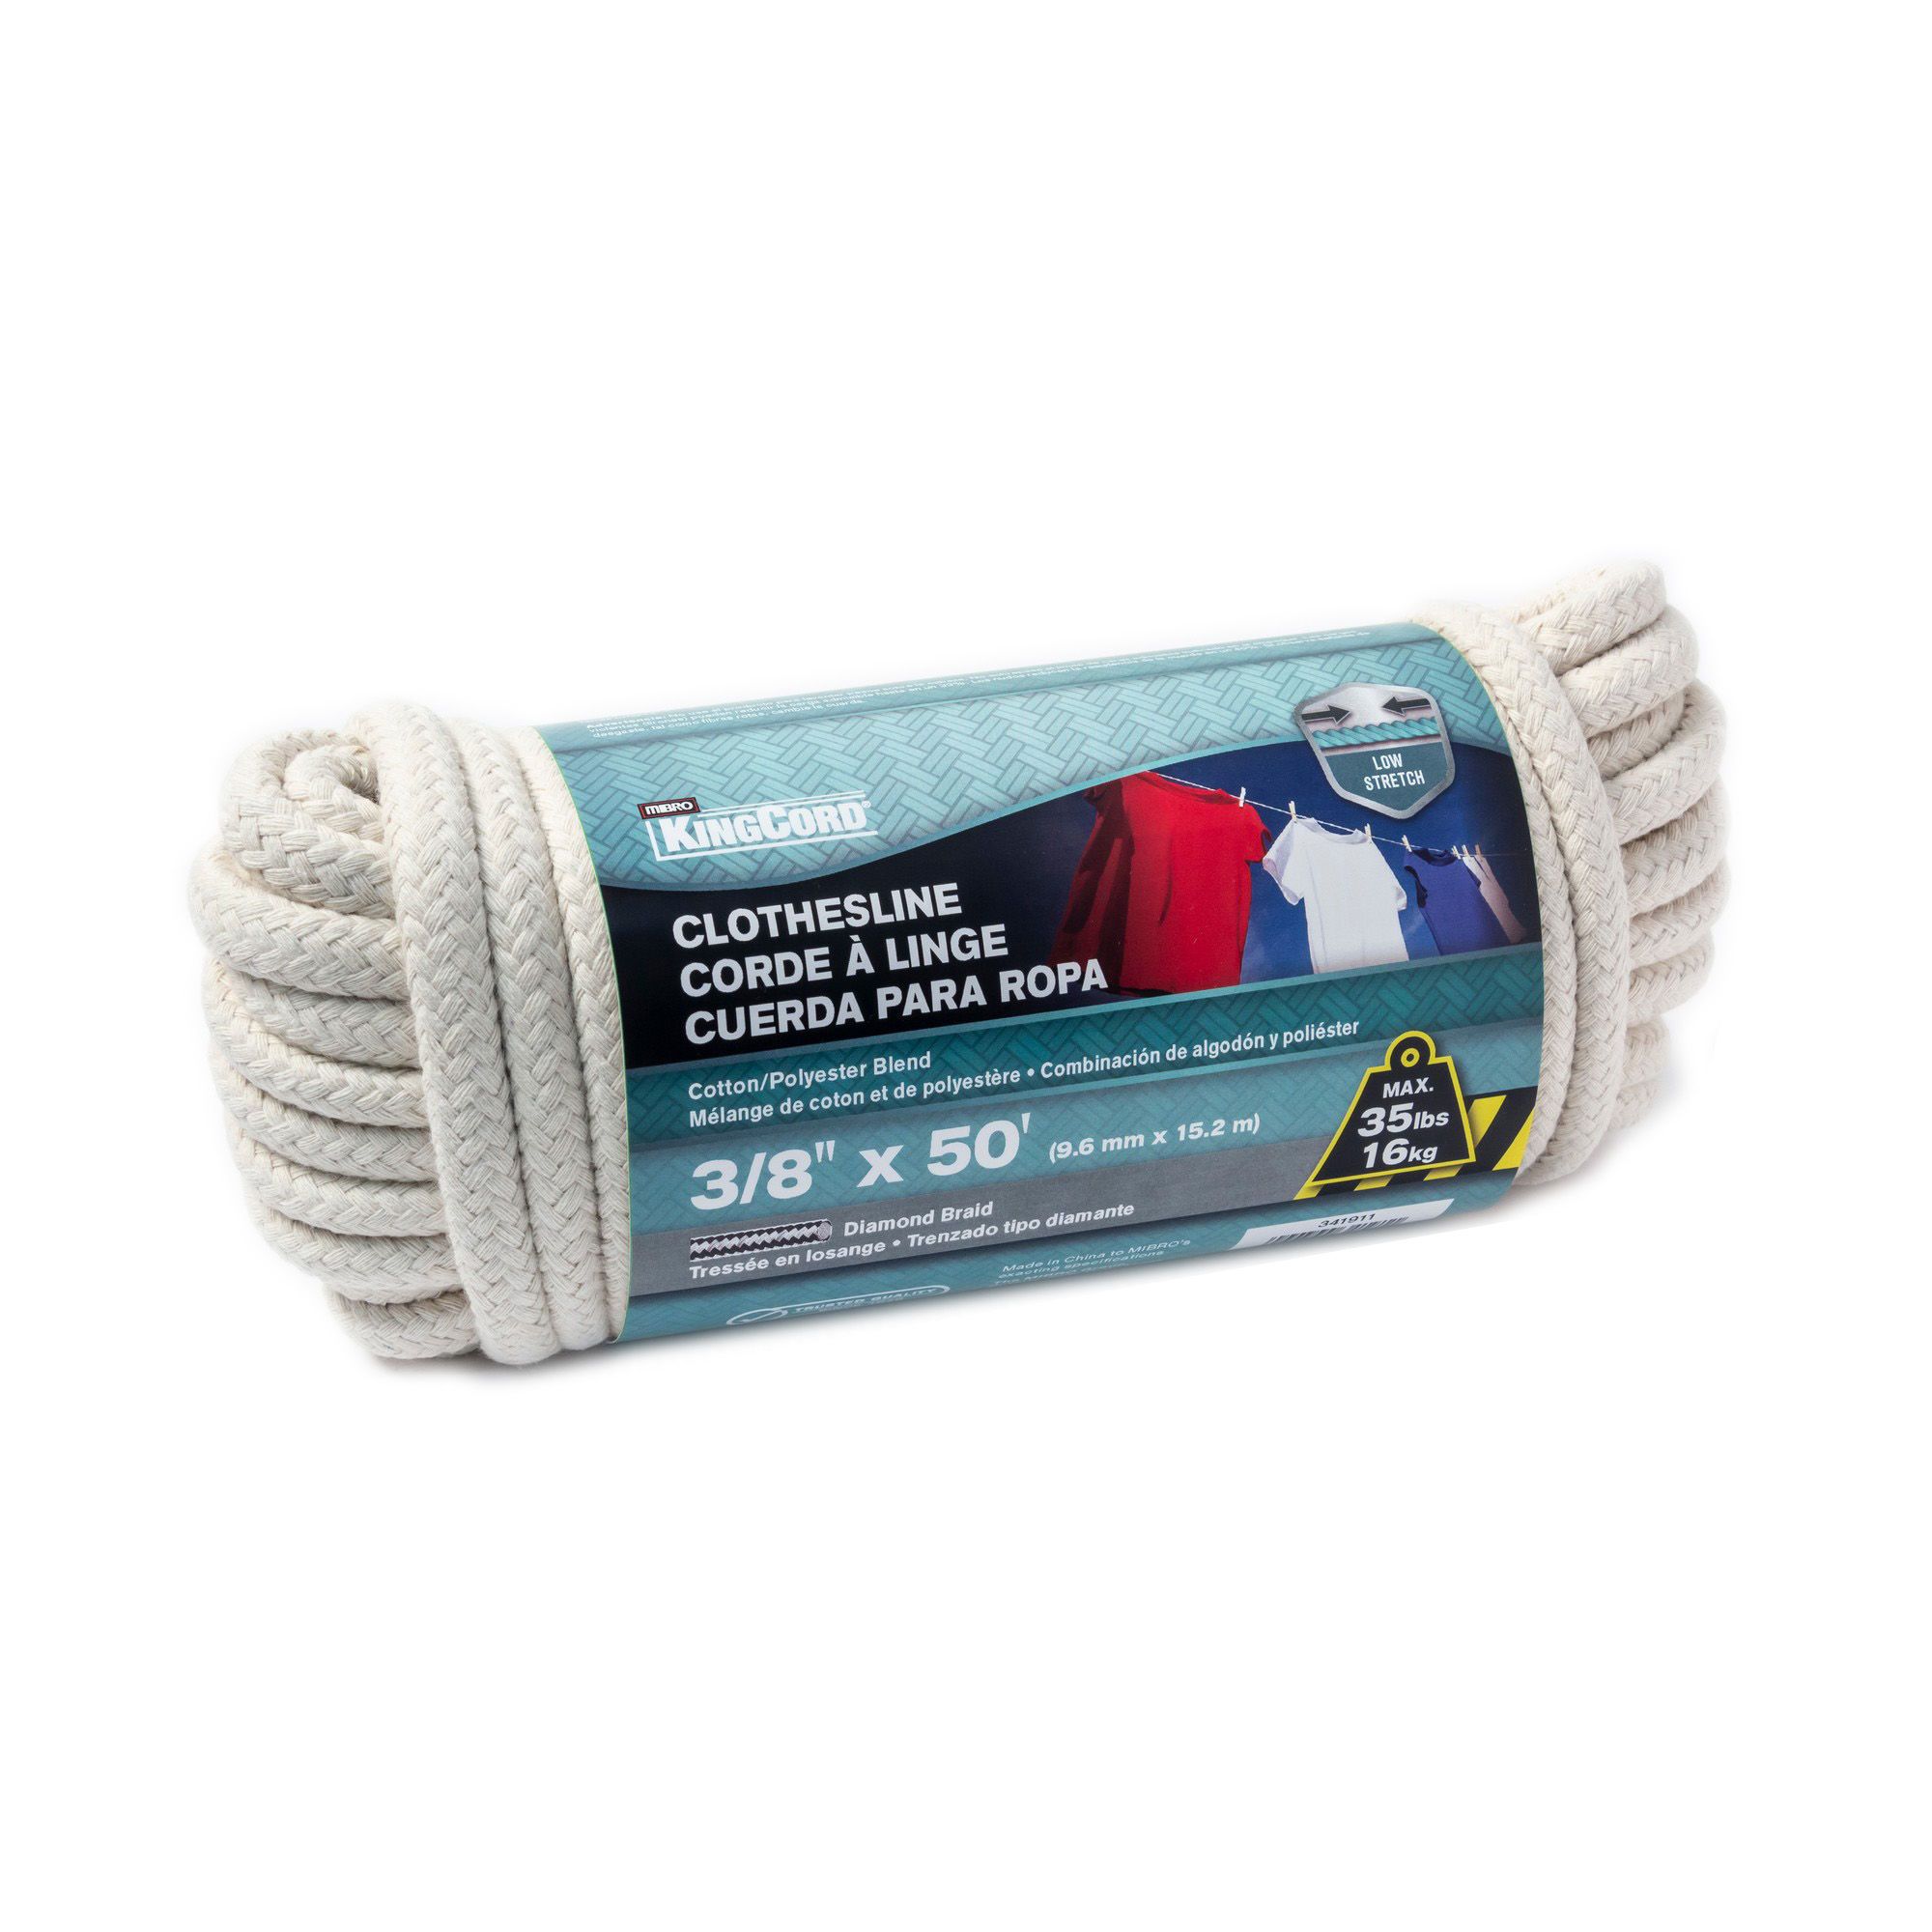 Cotton Polyester Diamond Braid Clothesline Rope - 3/8 x 50' from KINGCORD